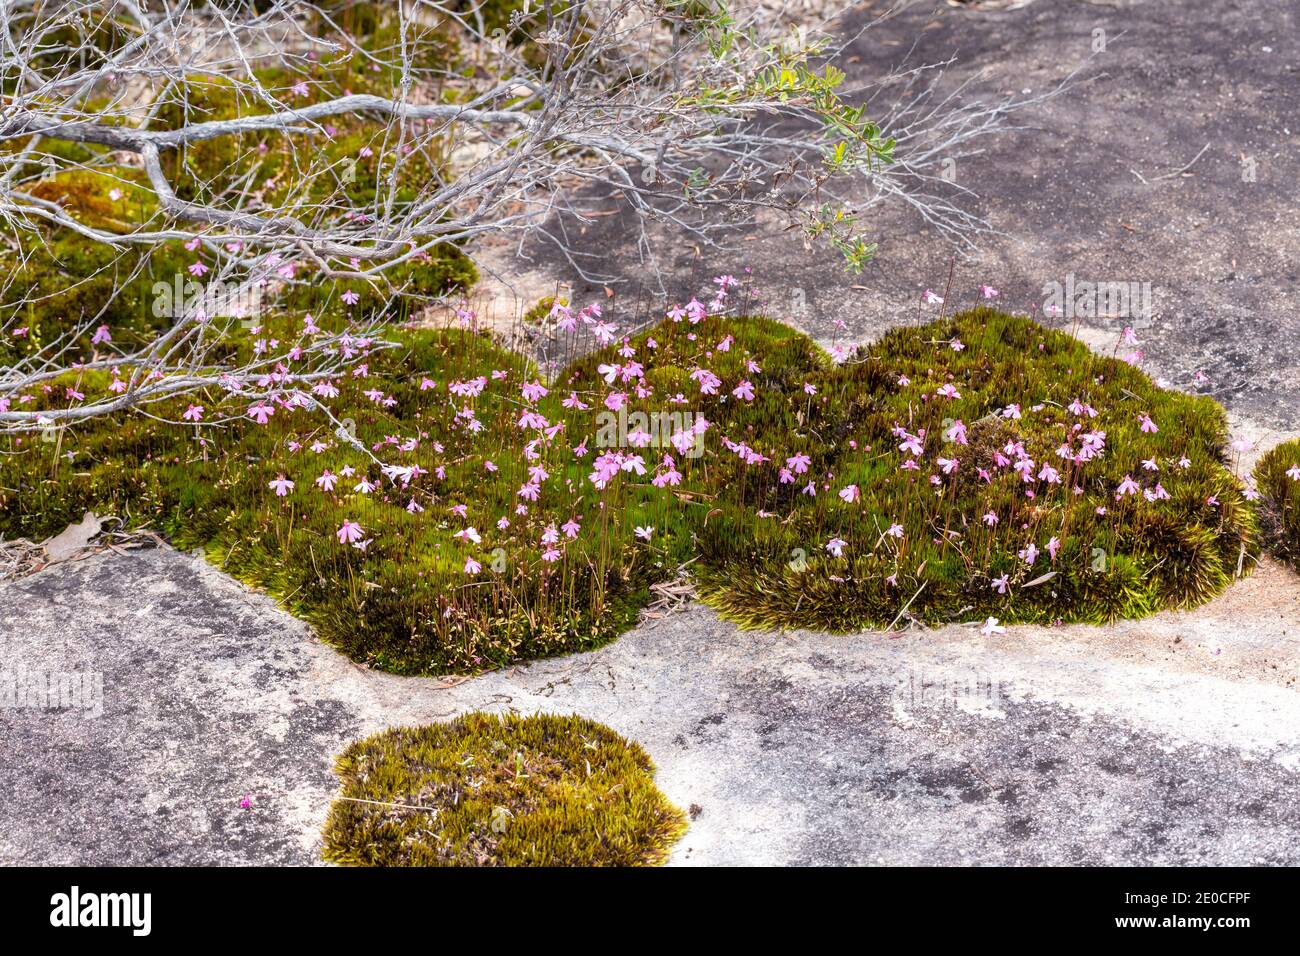 colony of the pink flowered Bladderwort Utricularia multifida growing on a granite rock outcrop close to Walpole in Western Australia Stock Photo